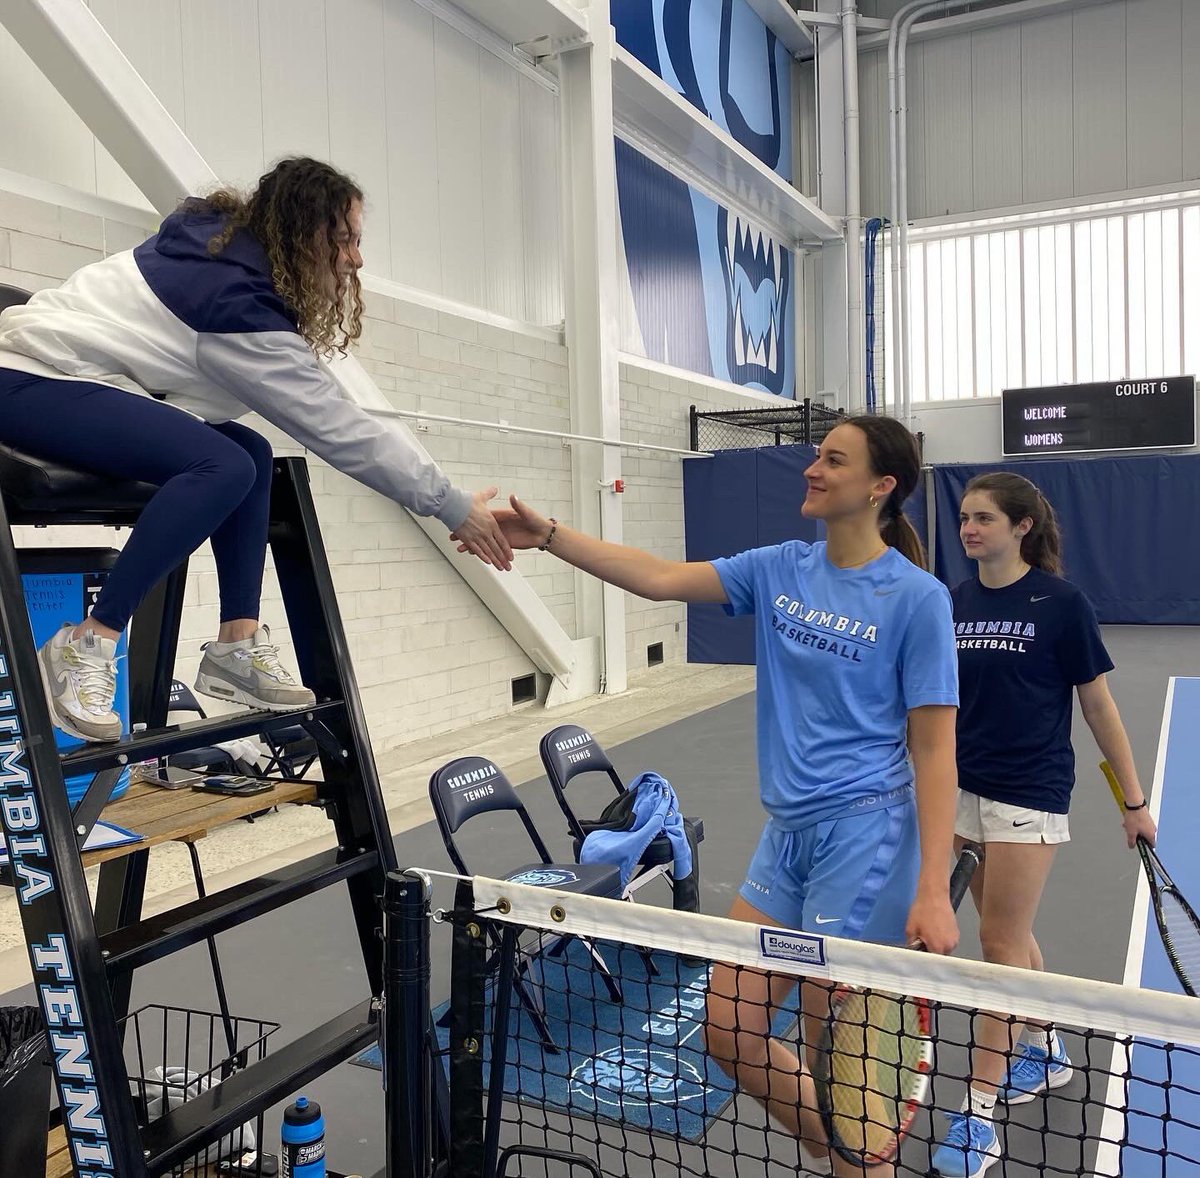 Huge shoutout to @culionsmten & @culionswten for having us up at the Milstein Family Tennis Center today! We had an absolute blast 🎾 Good luck in the postseason, we’re rooting hard for you all! 🦁🤩 #EDGE // #RoarLionRoar